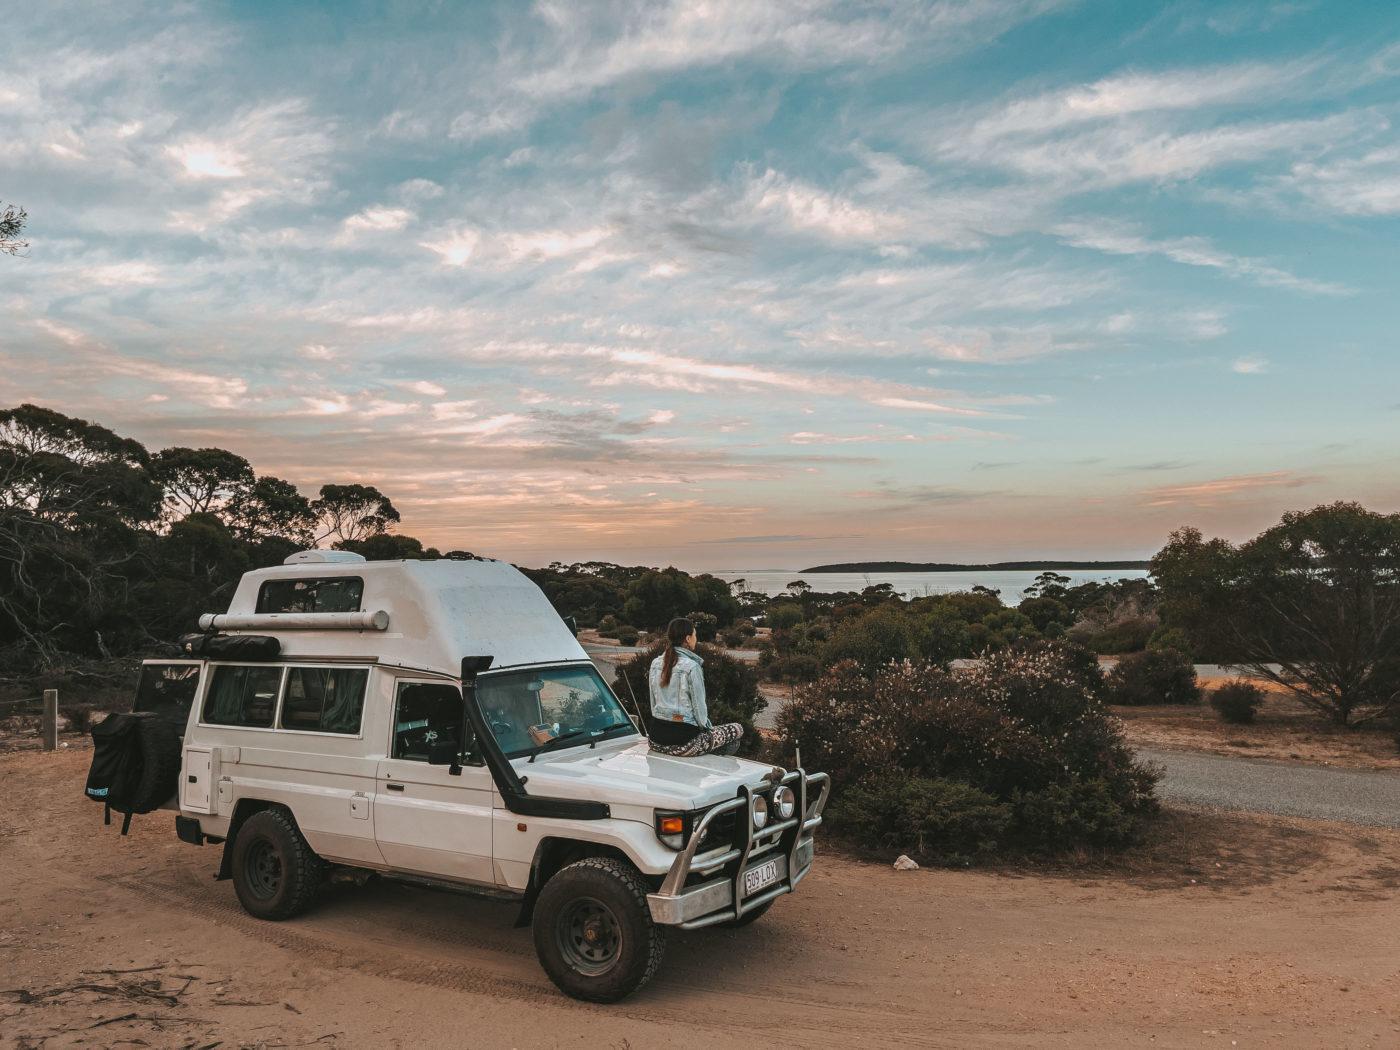 Surfleet Campground, Lincoln National Park, Eyre Peninsula